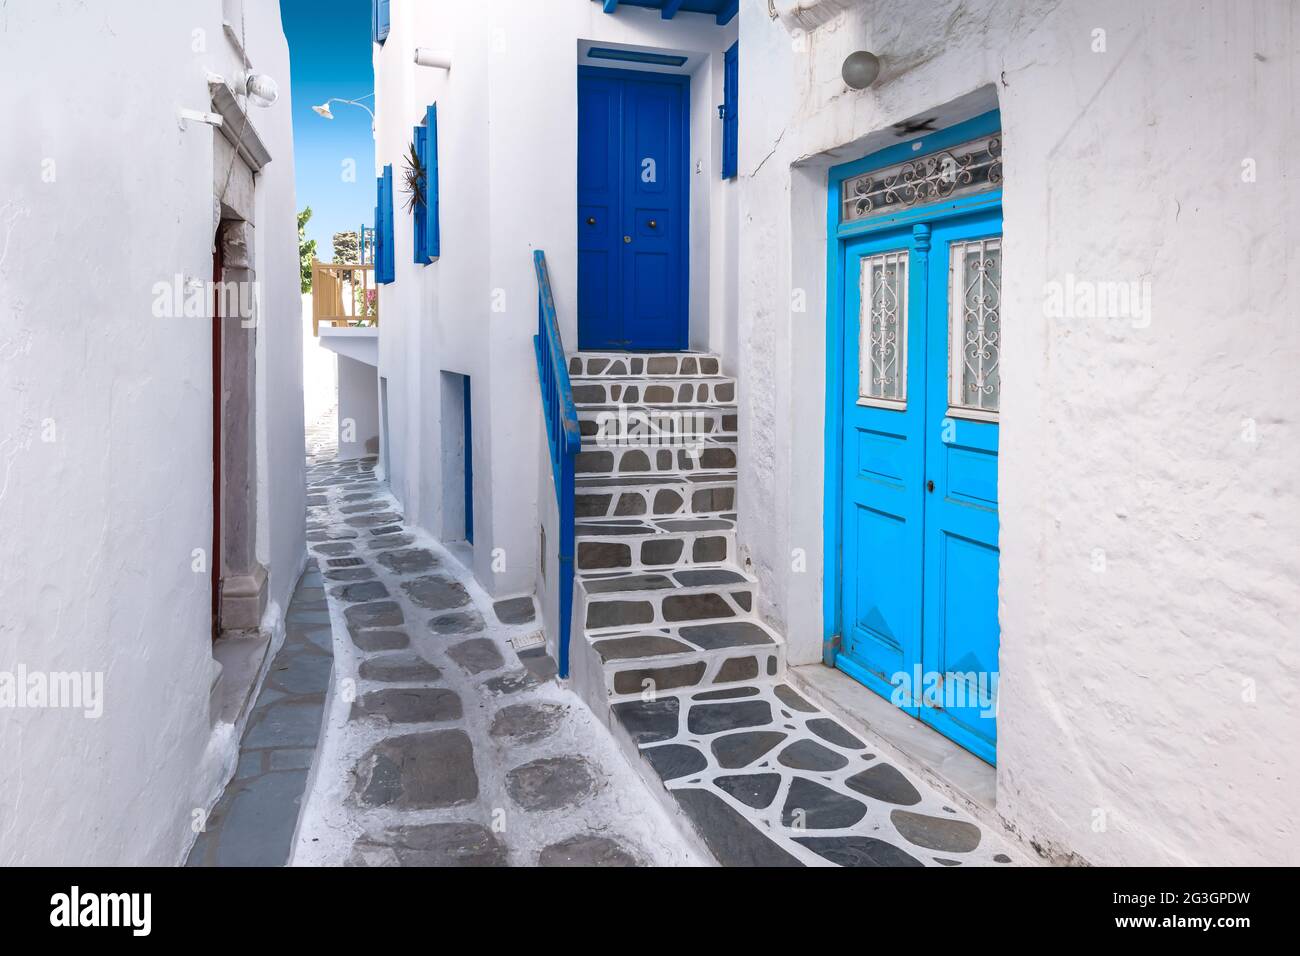 Traditional greek house with blue door and staircase in narrow city alley. Mykonos Island, Greece. Stock Photo